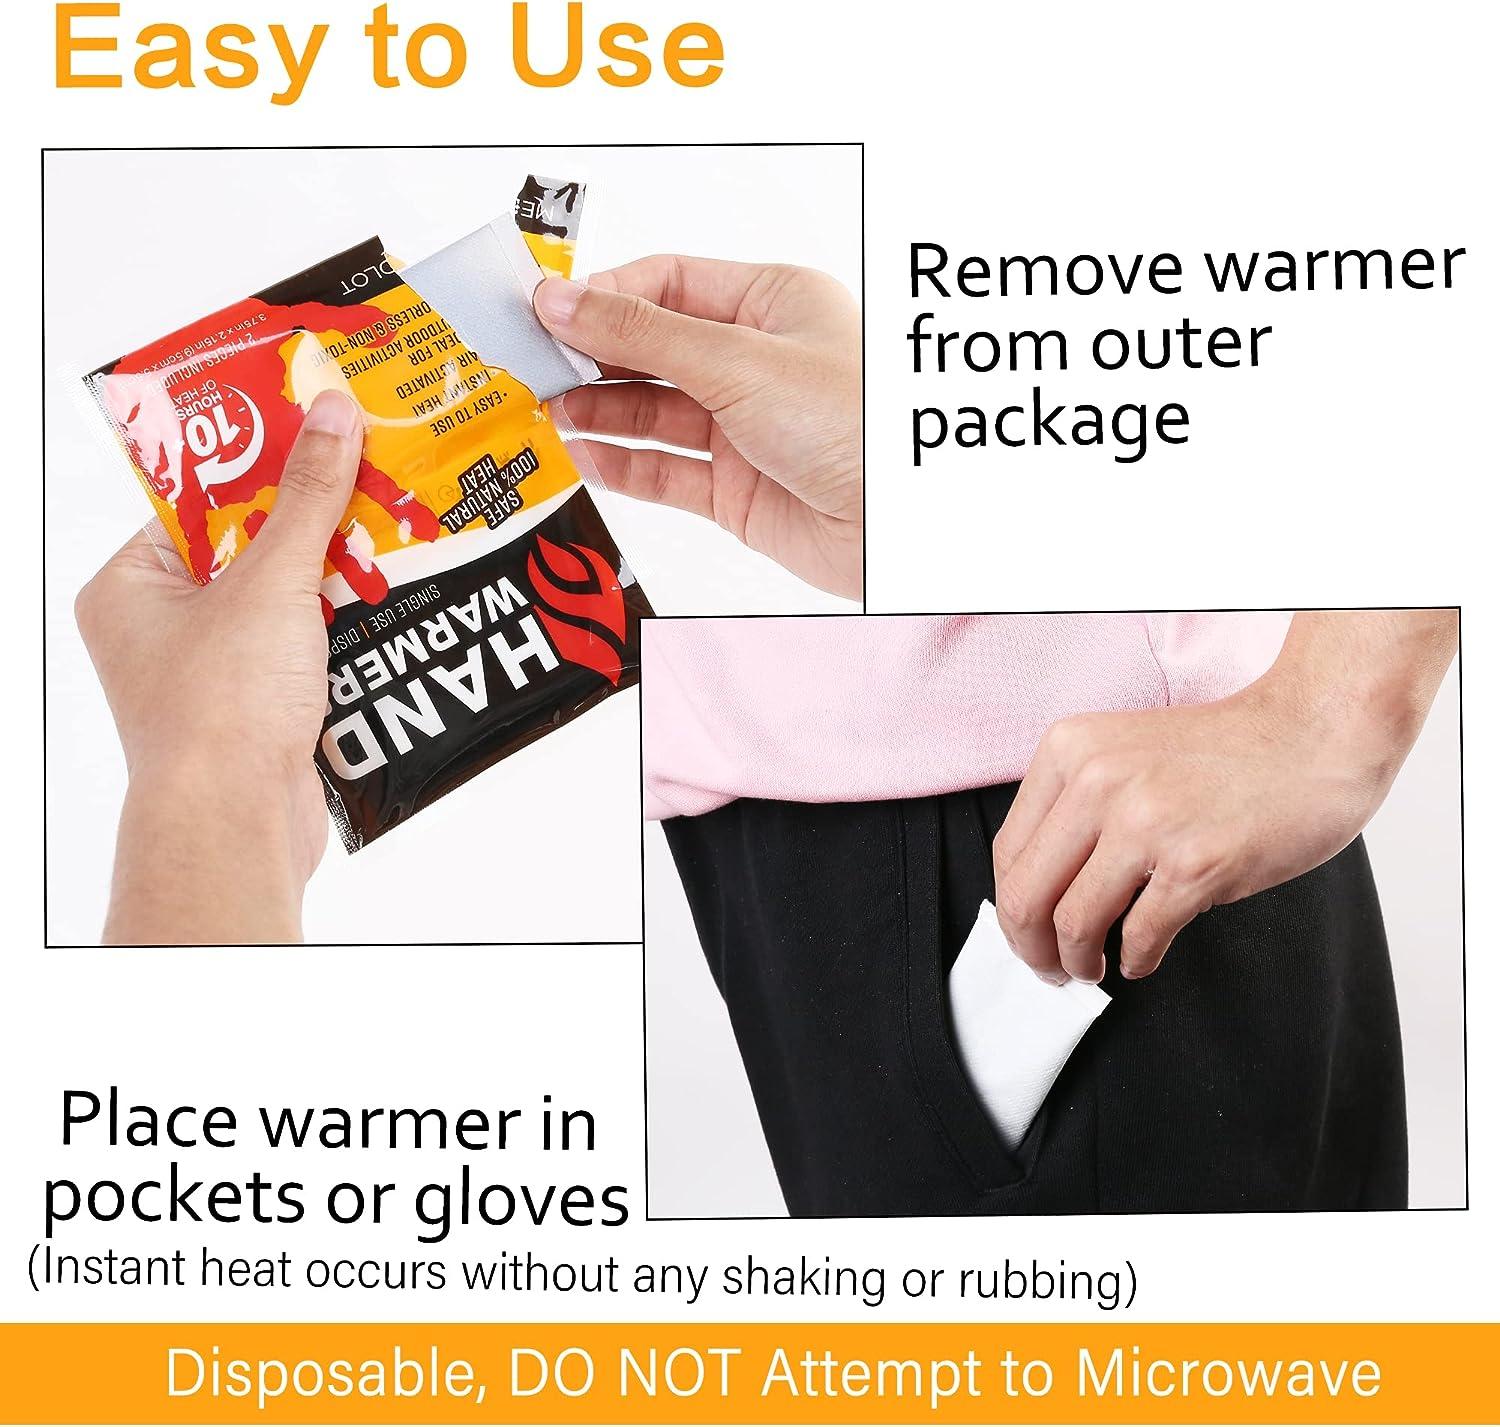 MEDLOT Hot Hand Warmer Packets, 20 / 40 Pairs, Disposable Pocket Warmer to  Keep Your Hands Warm and Toasty, Up to 10 Hours of Heat 20 Pairs